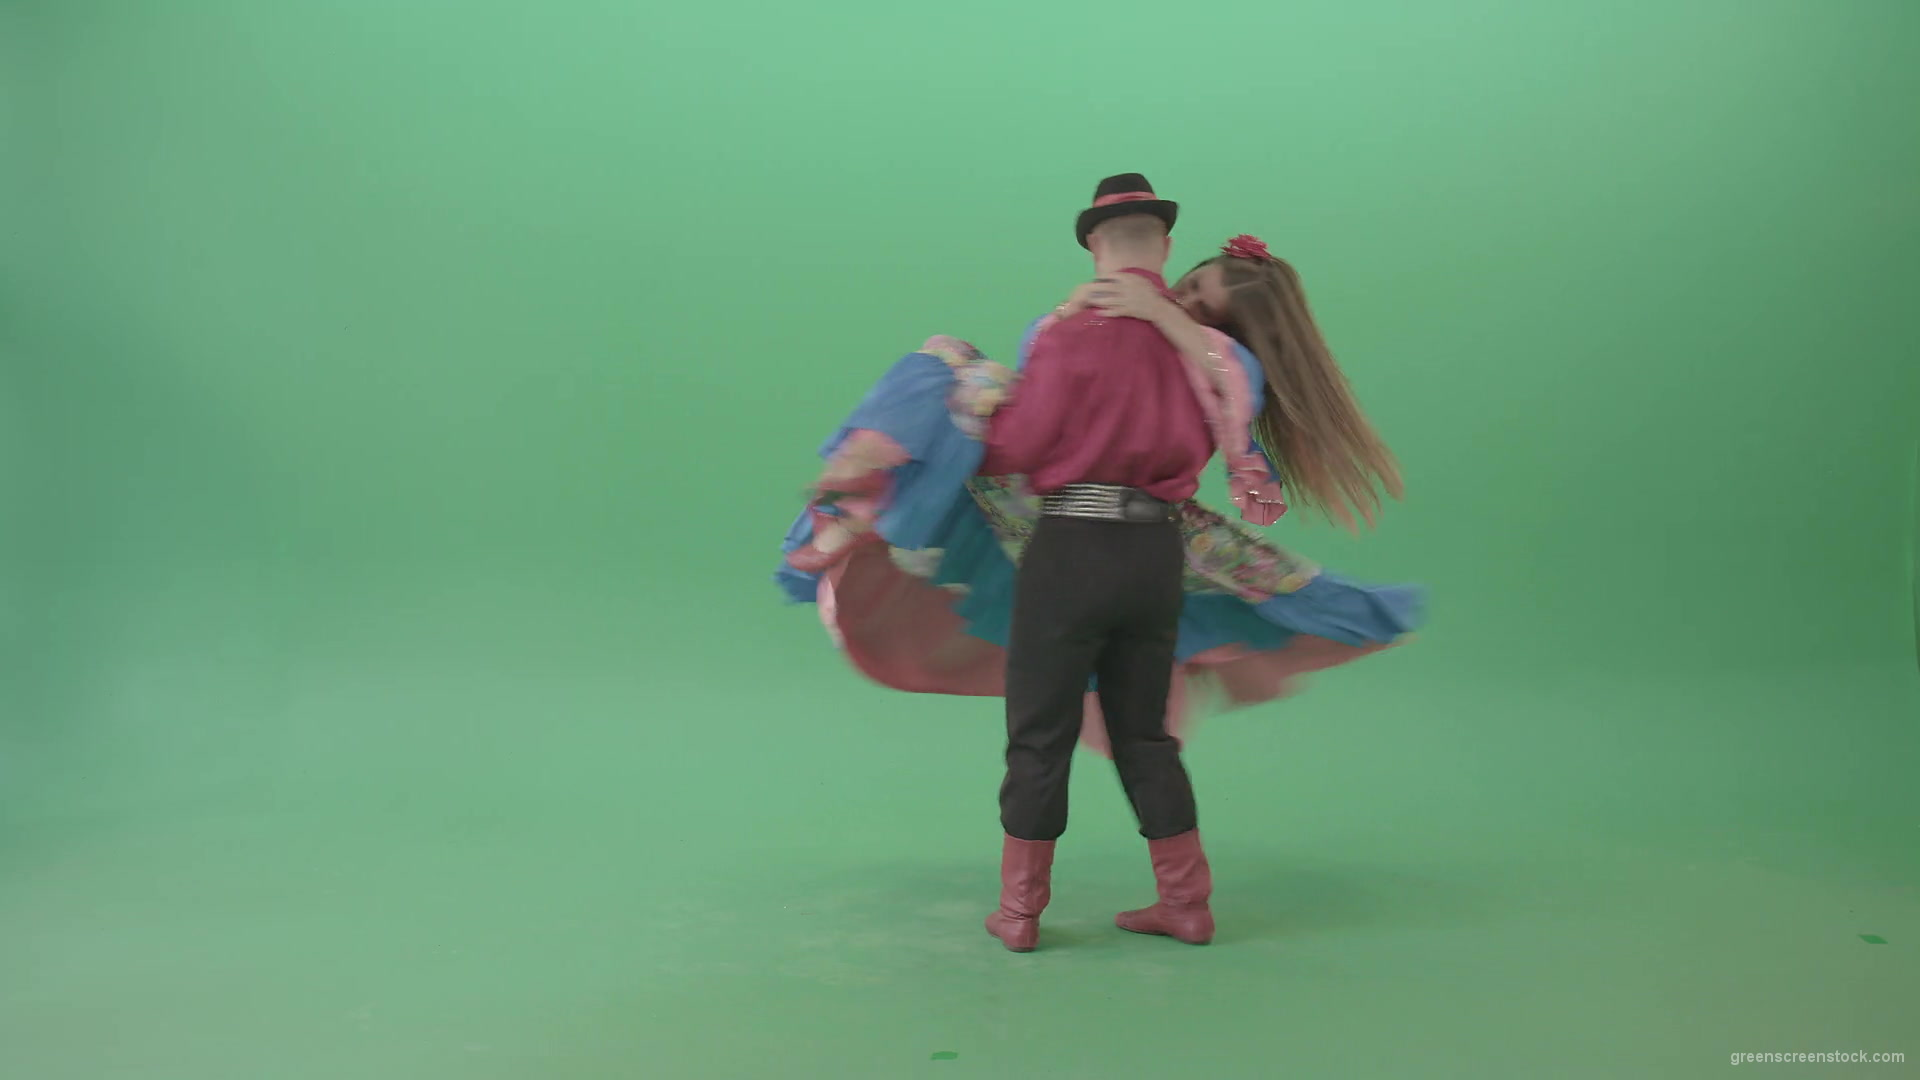 Gypsy-man-and-woman-spinning-dancing-over-green-screen-4K-video-footage-1920_006 Green Screen Stock